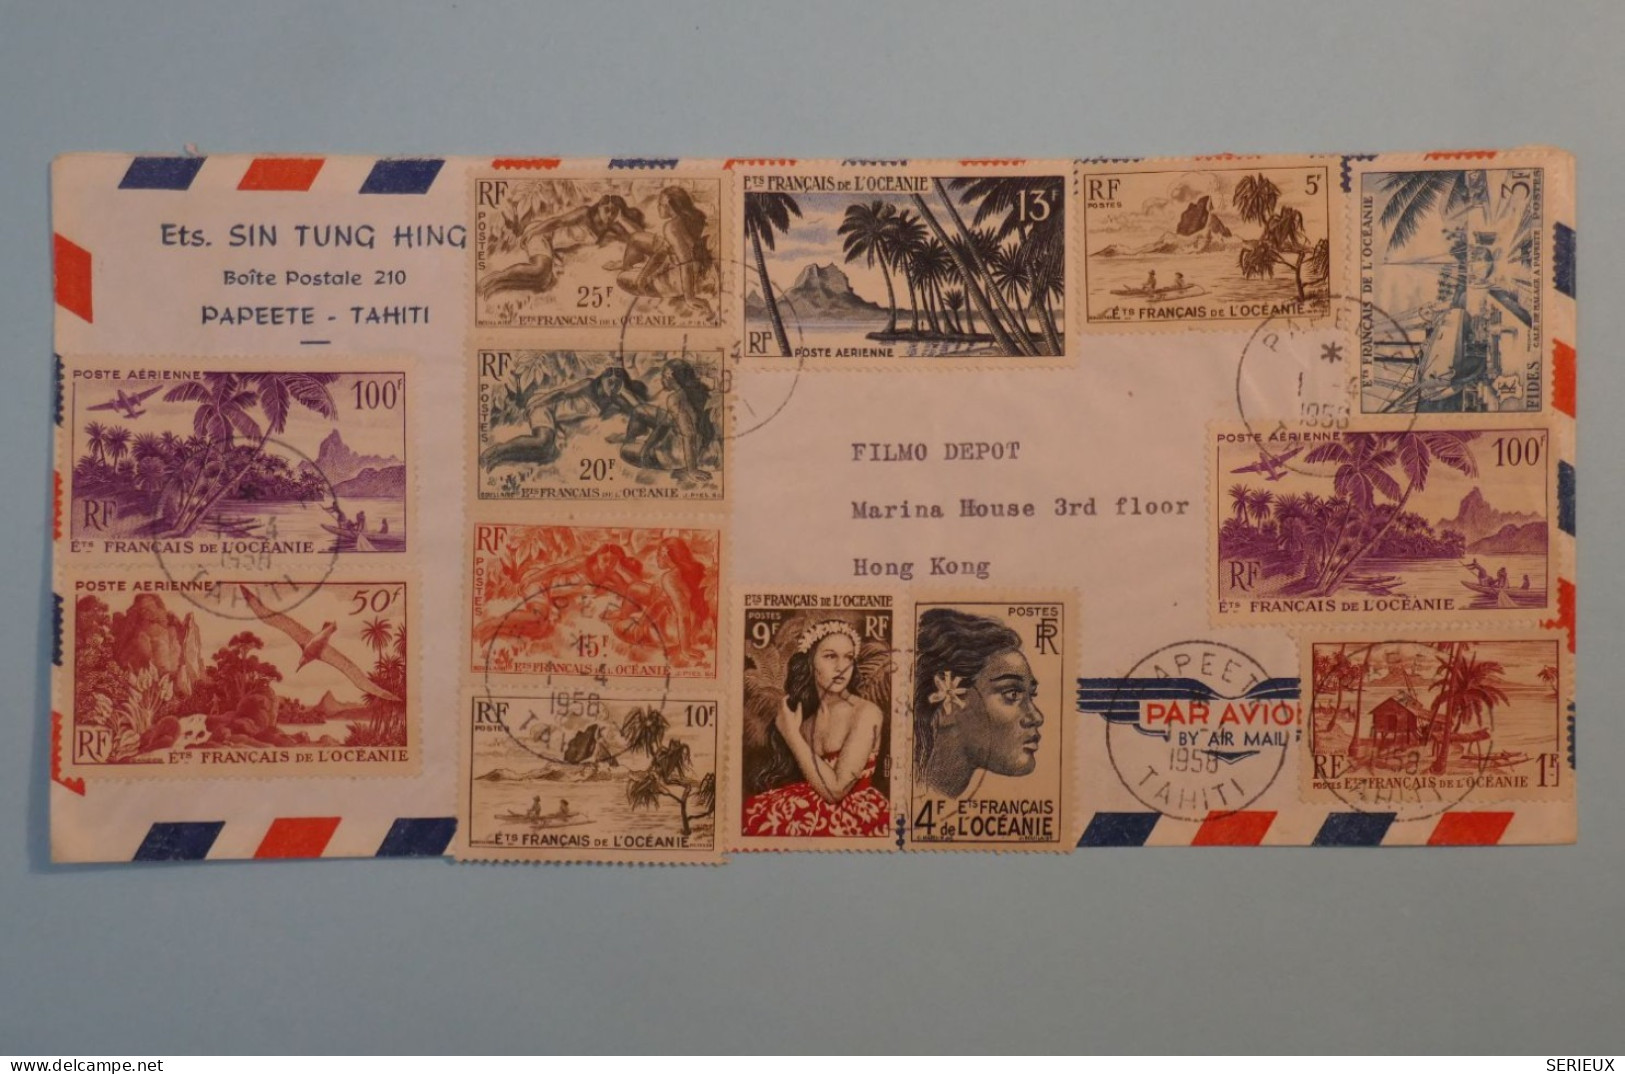 BT 16 ETAB. OCEANIE  BELLE LETTRE  RARE 1953 BY AIR MAIL  PAPEETE  A HONG KONG CHINA +AFFR SPECTACULAIRE +++ - Briefe U. Dokumente